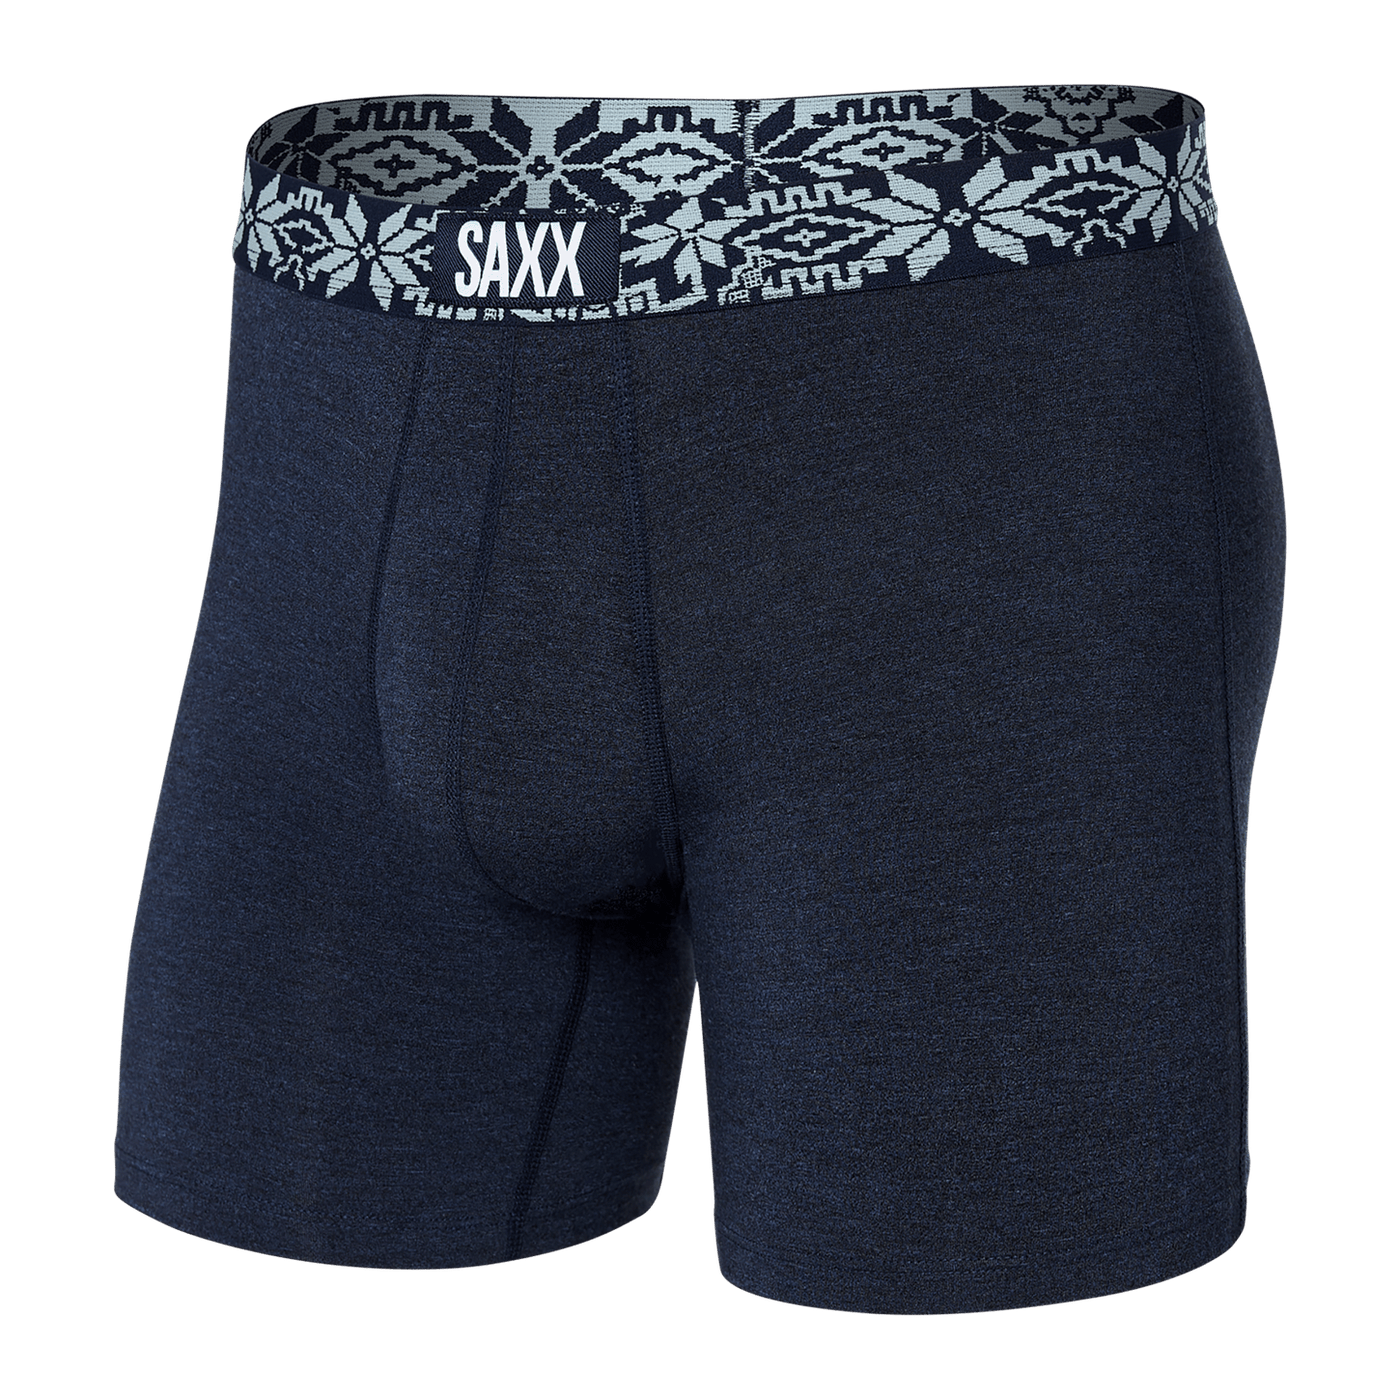 Saxx Vibe Boxers - Navy Heather/Holiday WB - The Hockey Shop Source For Sports